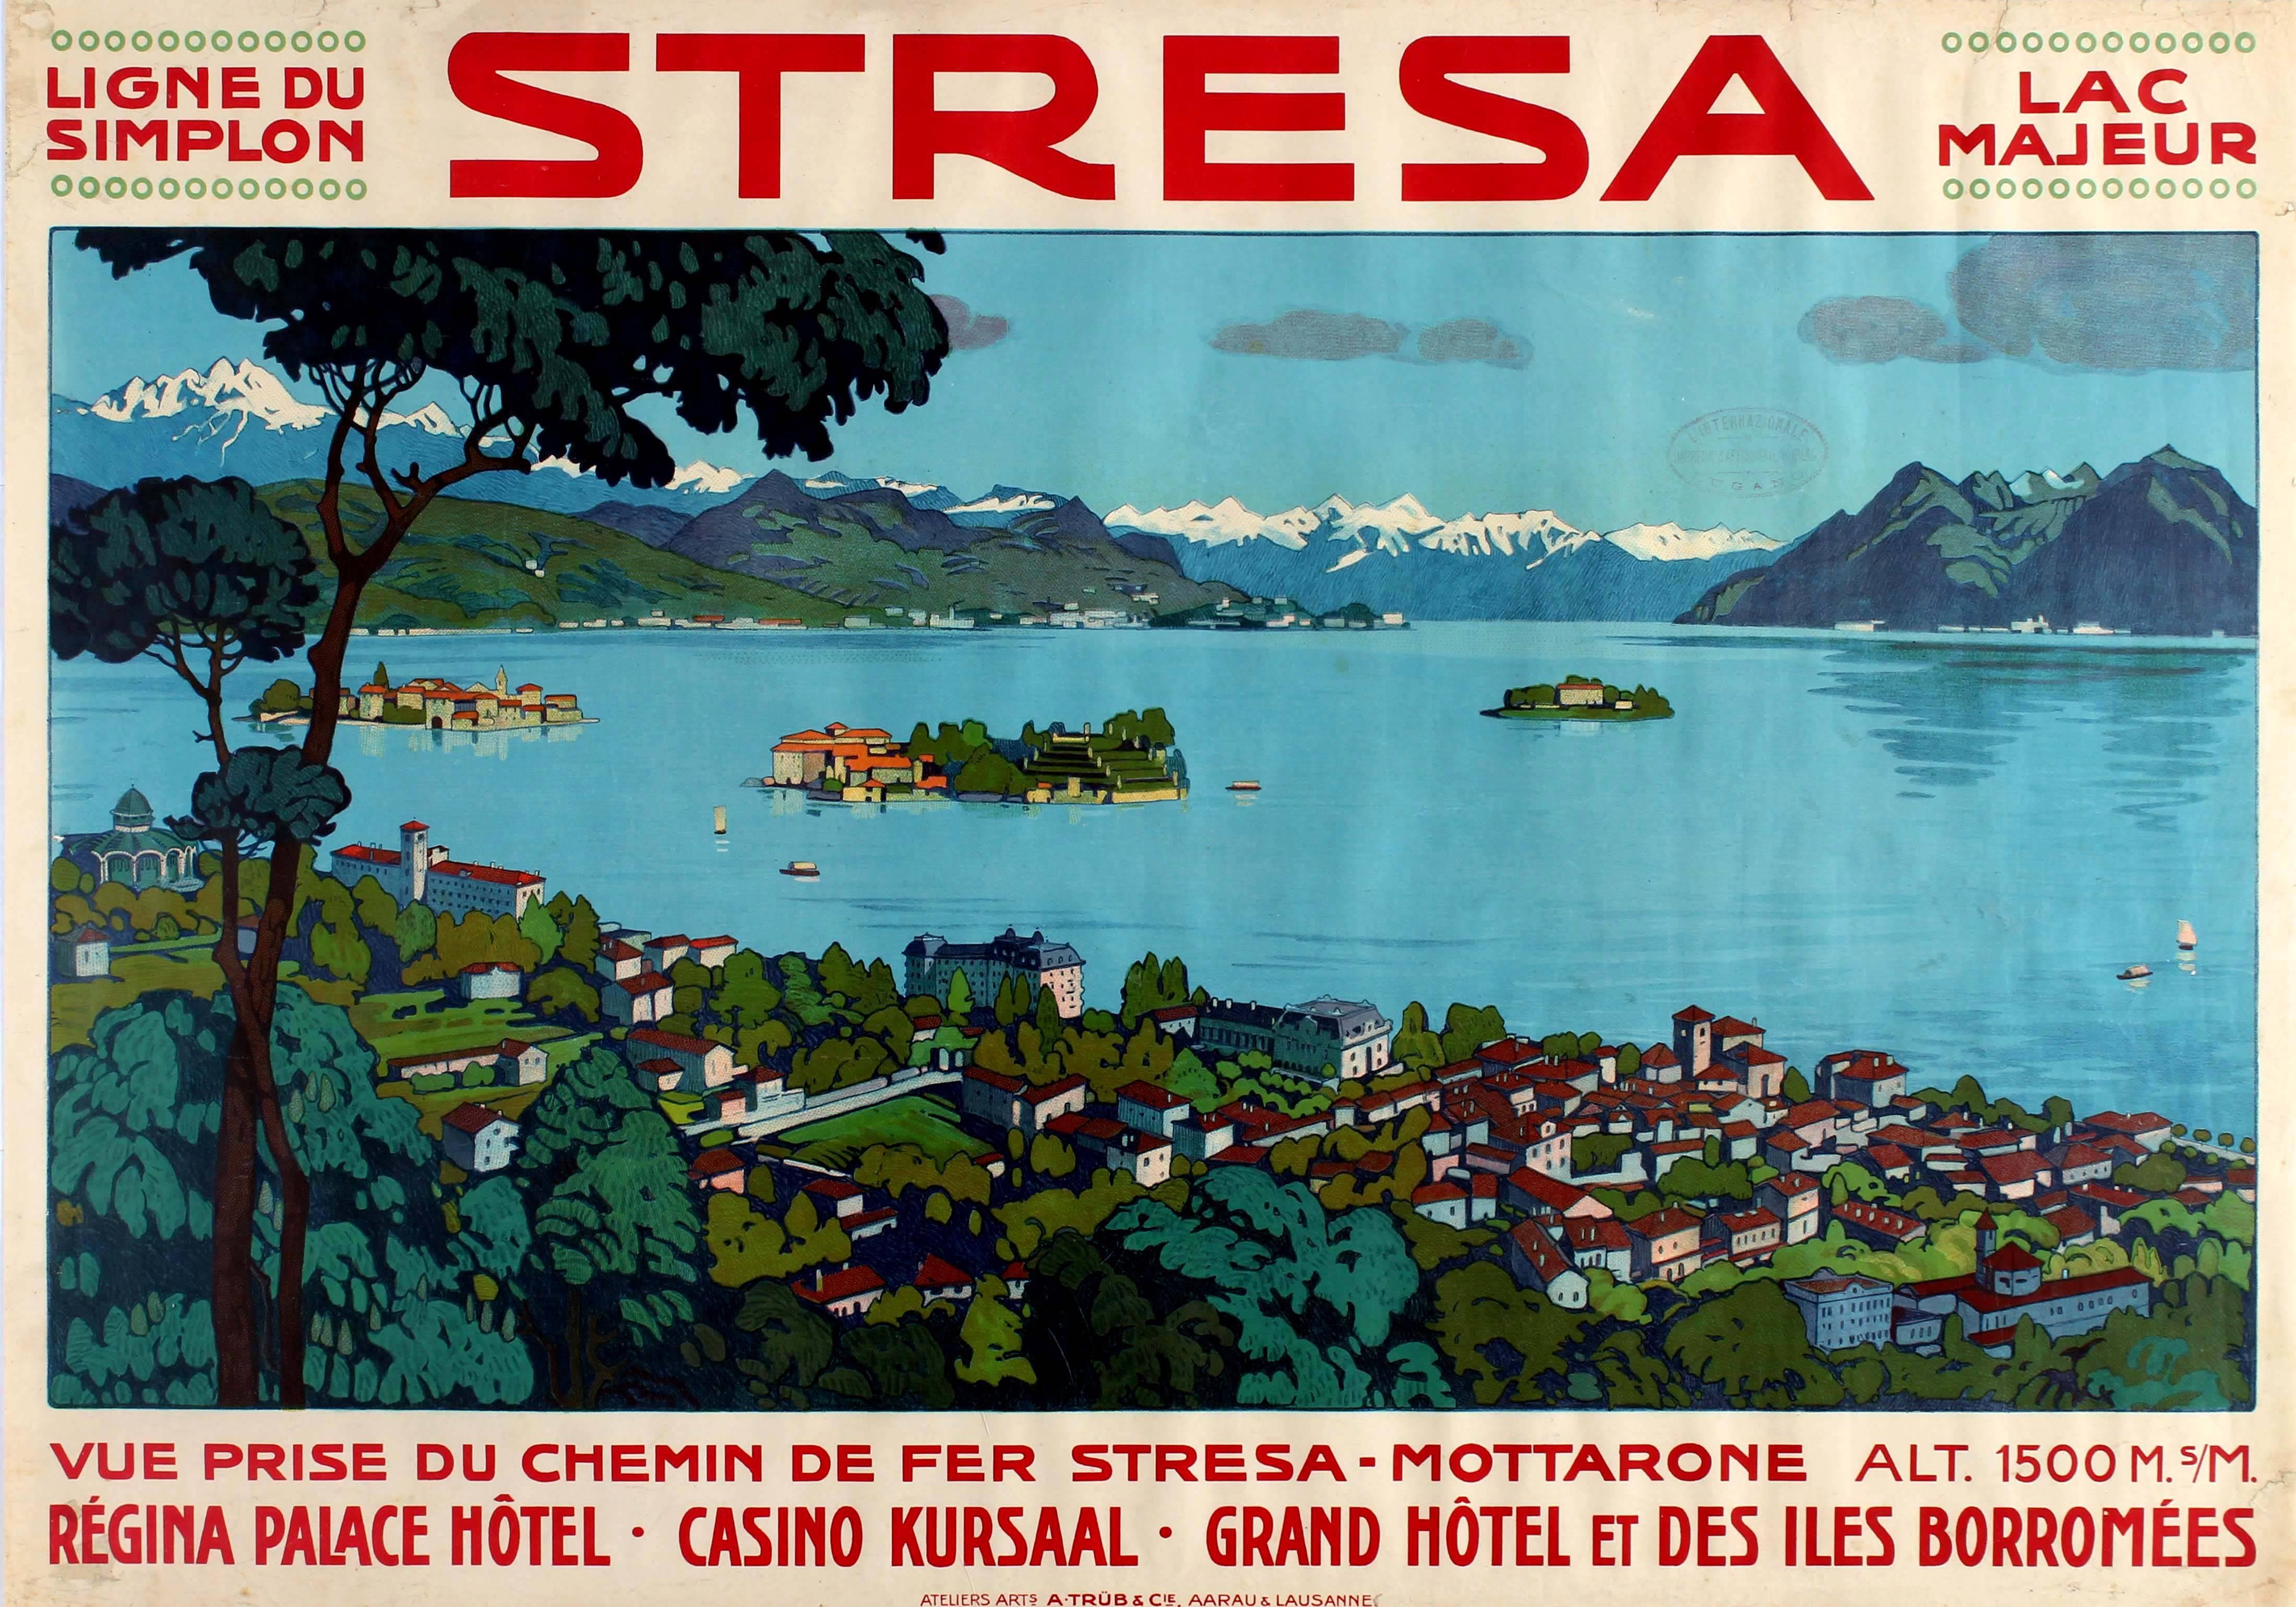 Unknown Print - Original Early Simplon Railway Travel Poster For Stresa On Lake Maggiore Italy